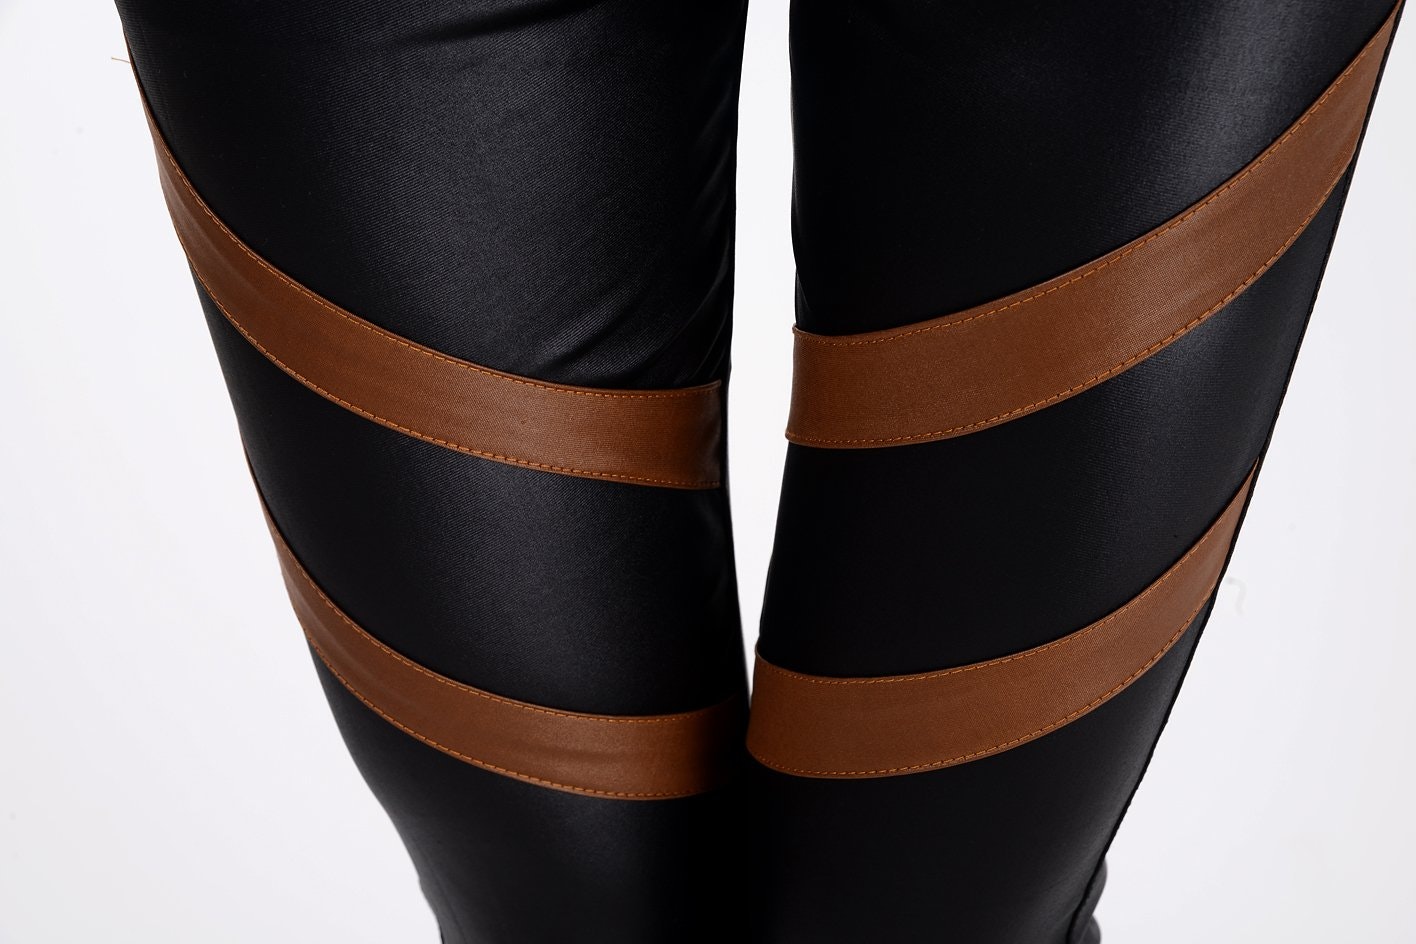 Black Faux Leggings with Brown stripes and pockets